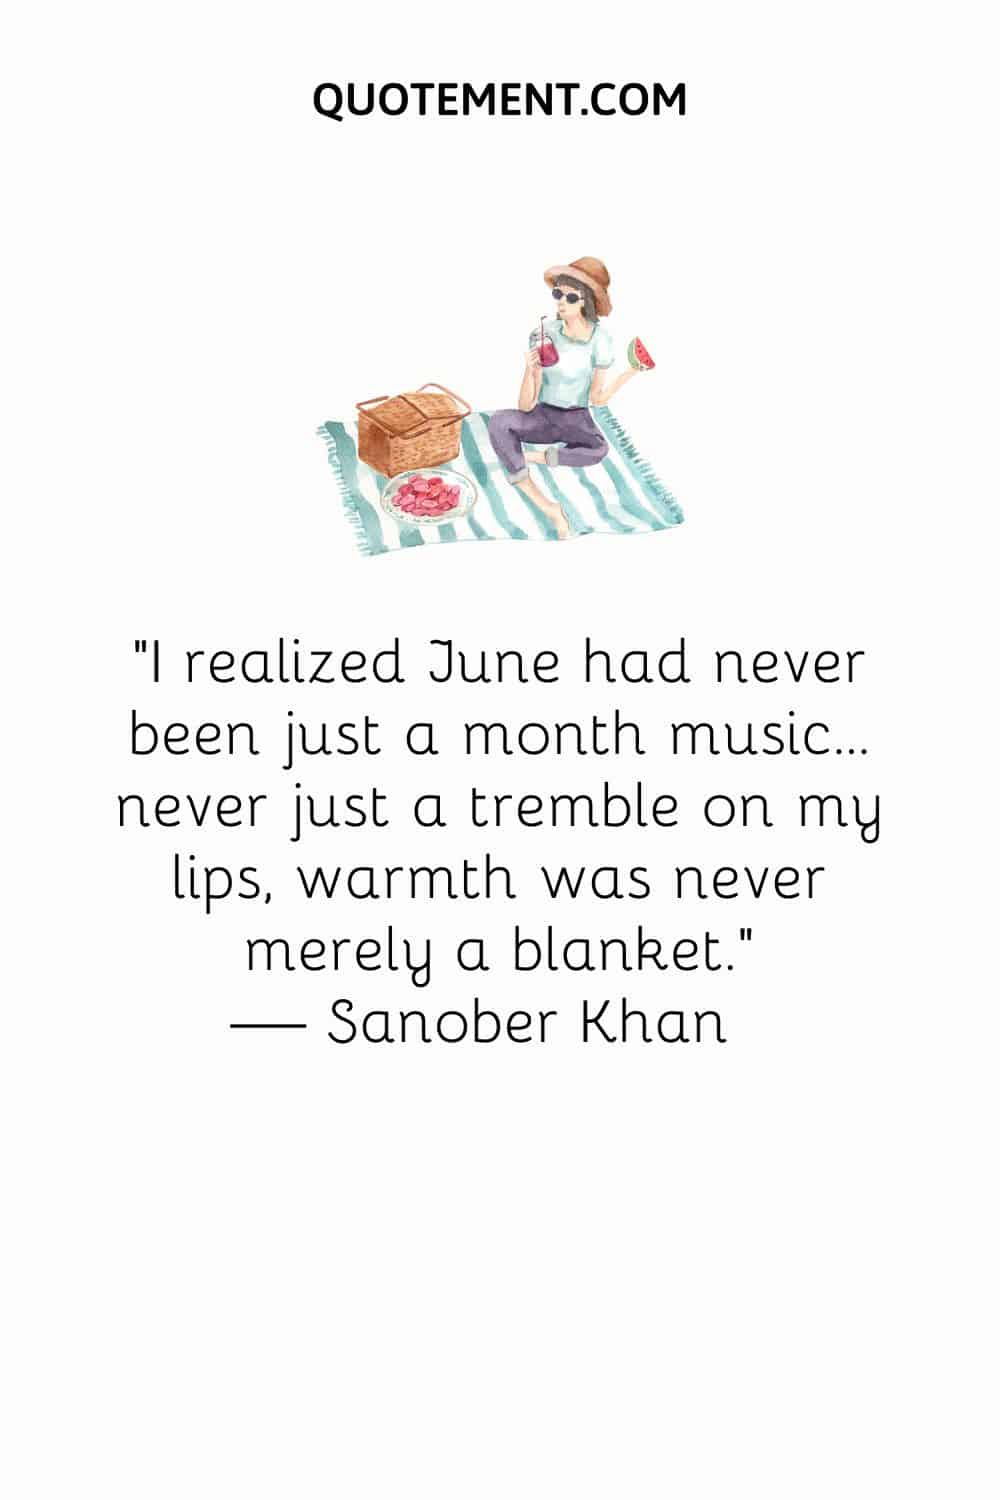 “I realized June had never been just a month music… never just a tremble on my lips, warmth was never merely a blanket.” — Sanober Khan